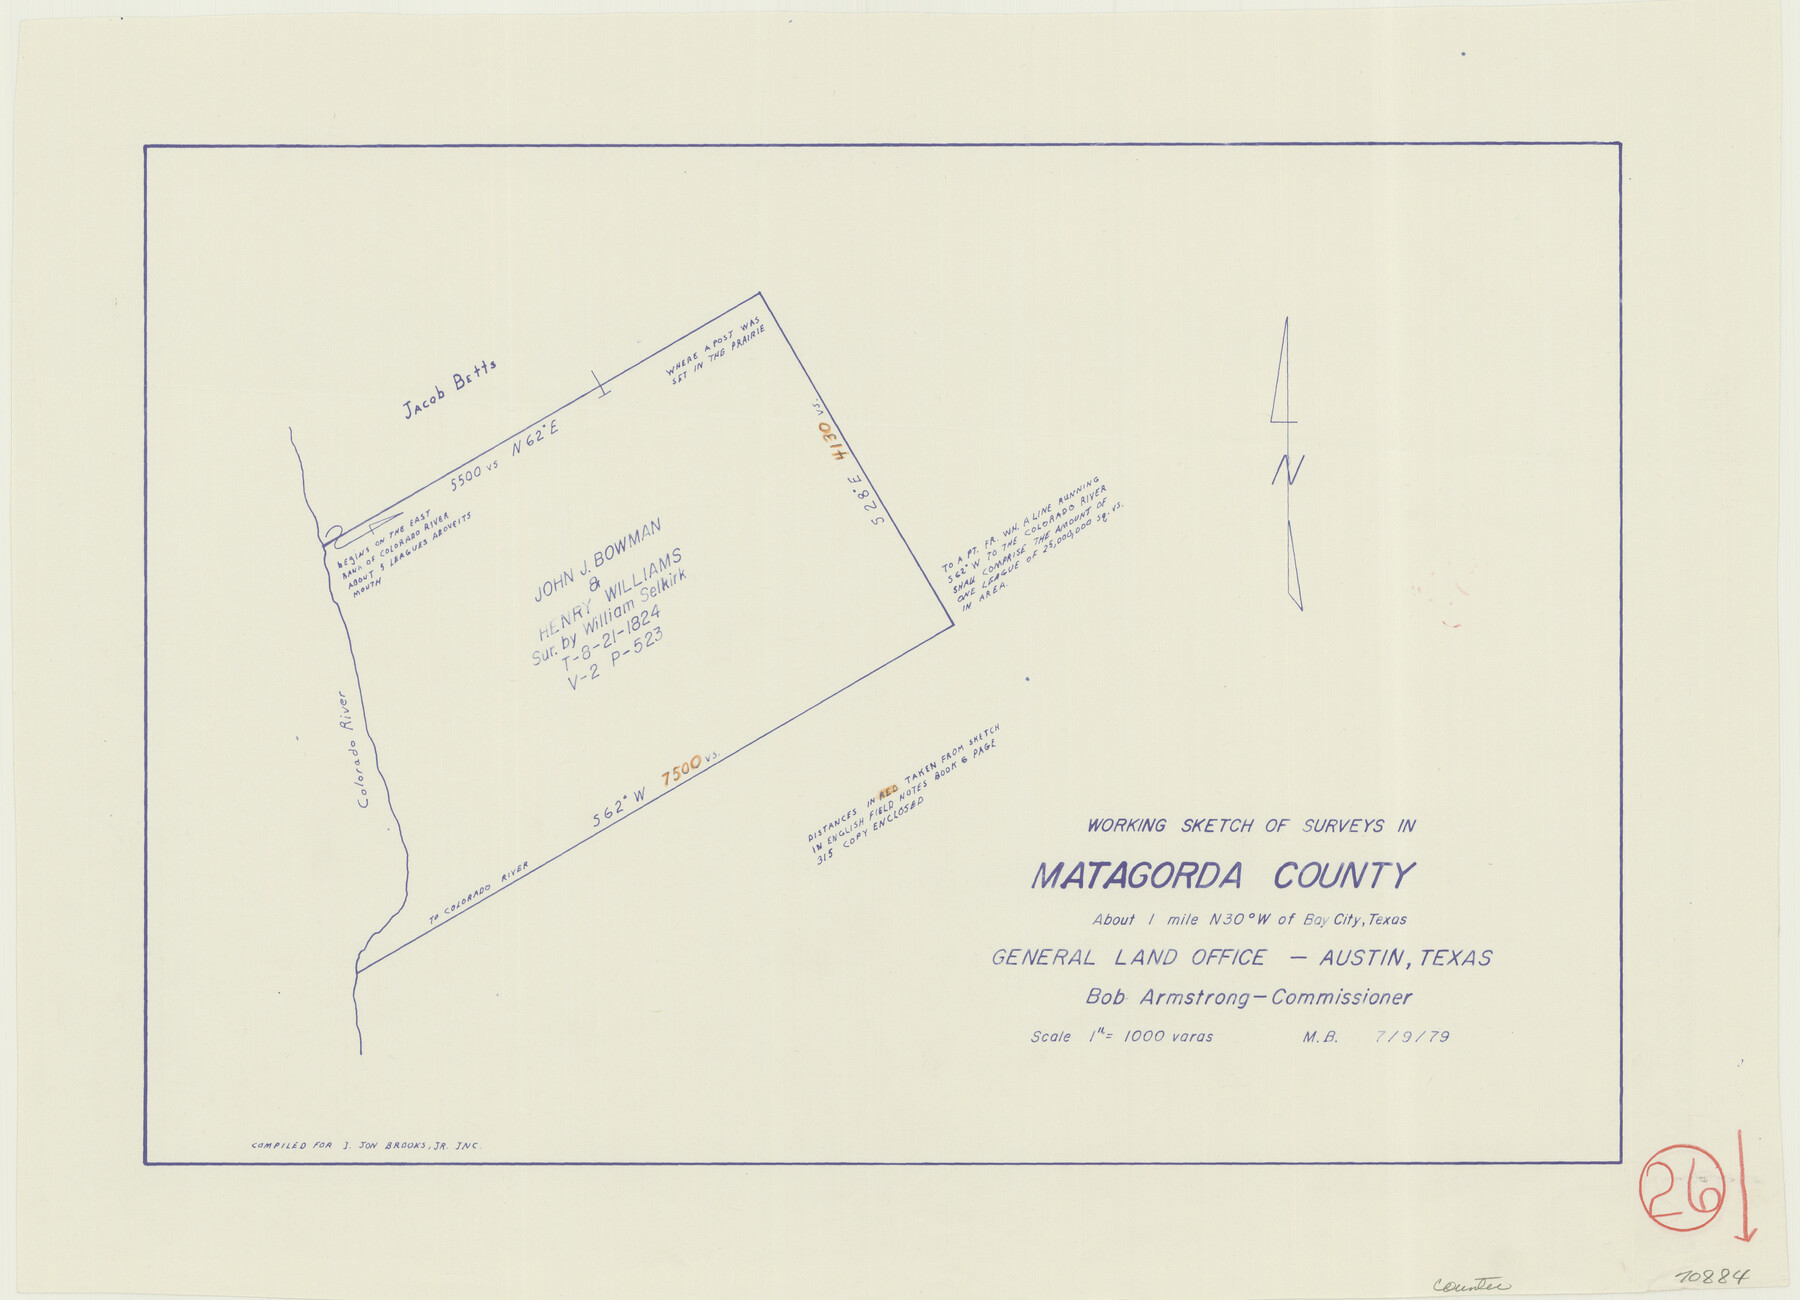 70884, Matagorda County Working Sketch 26, General Map Collection